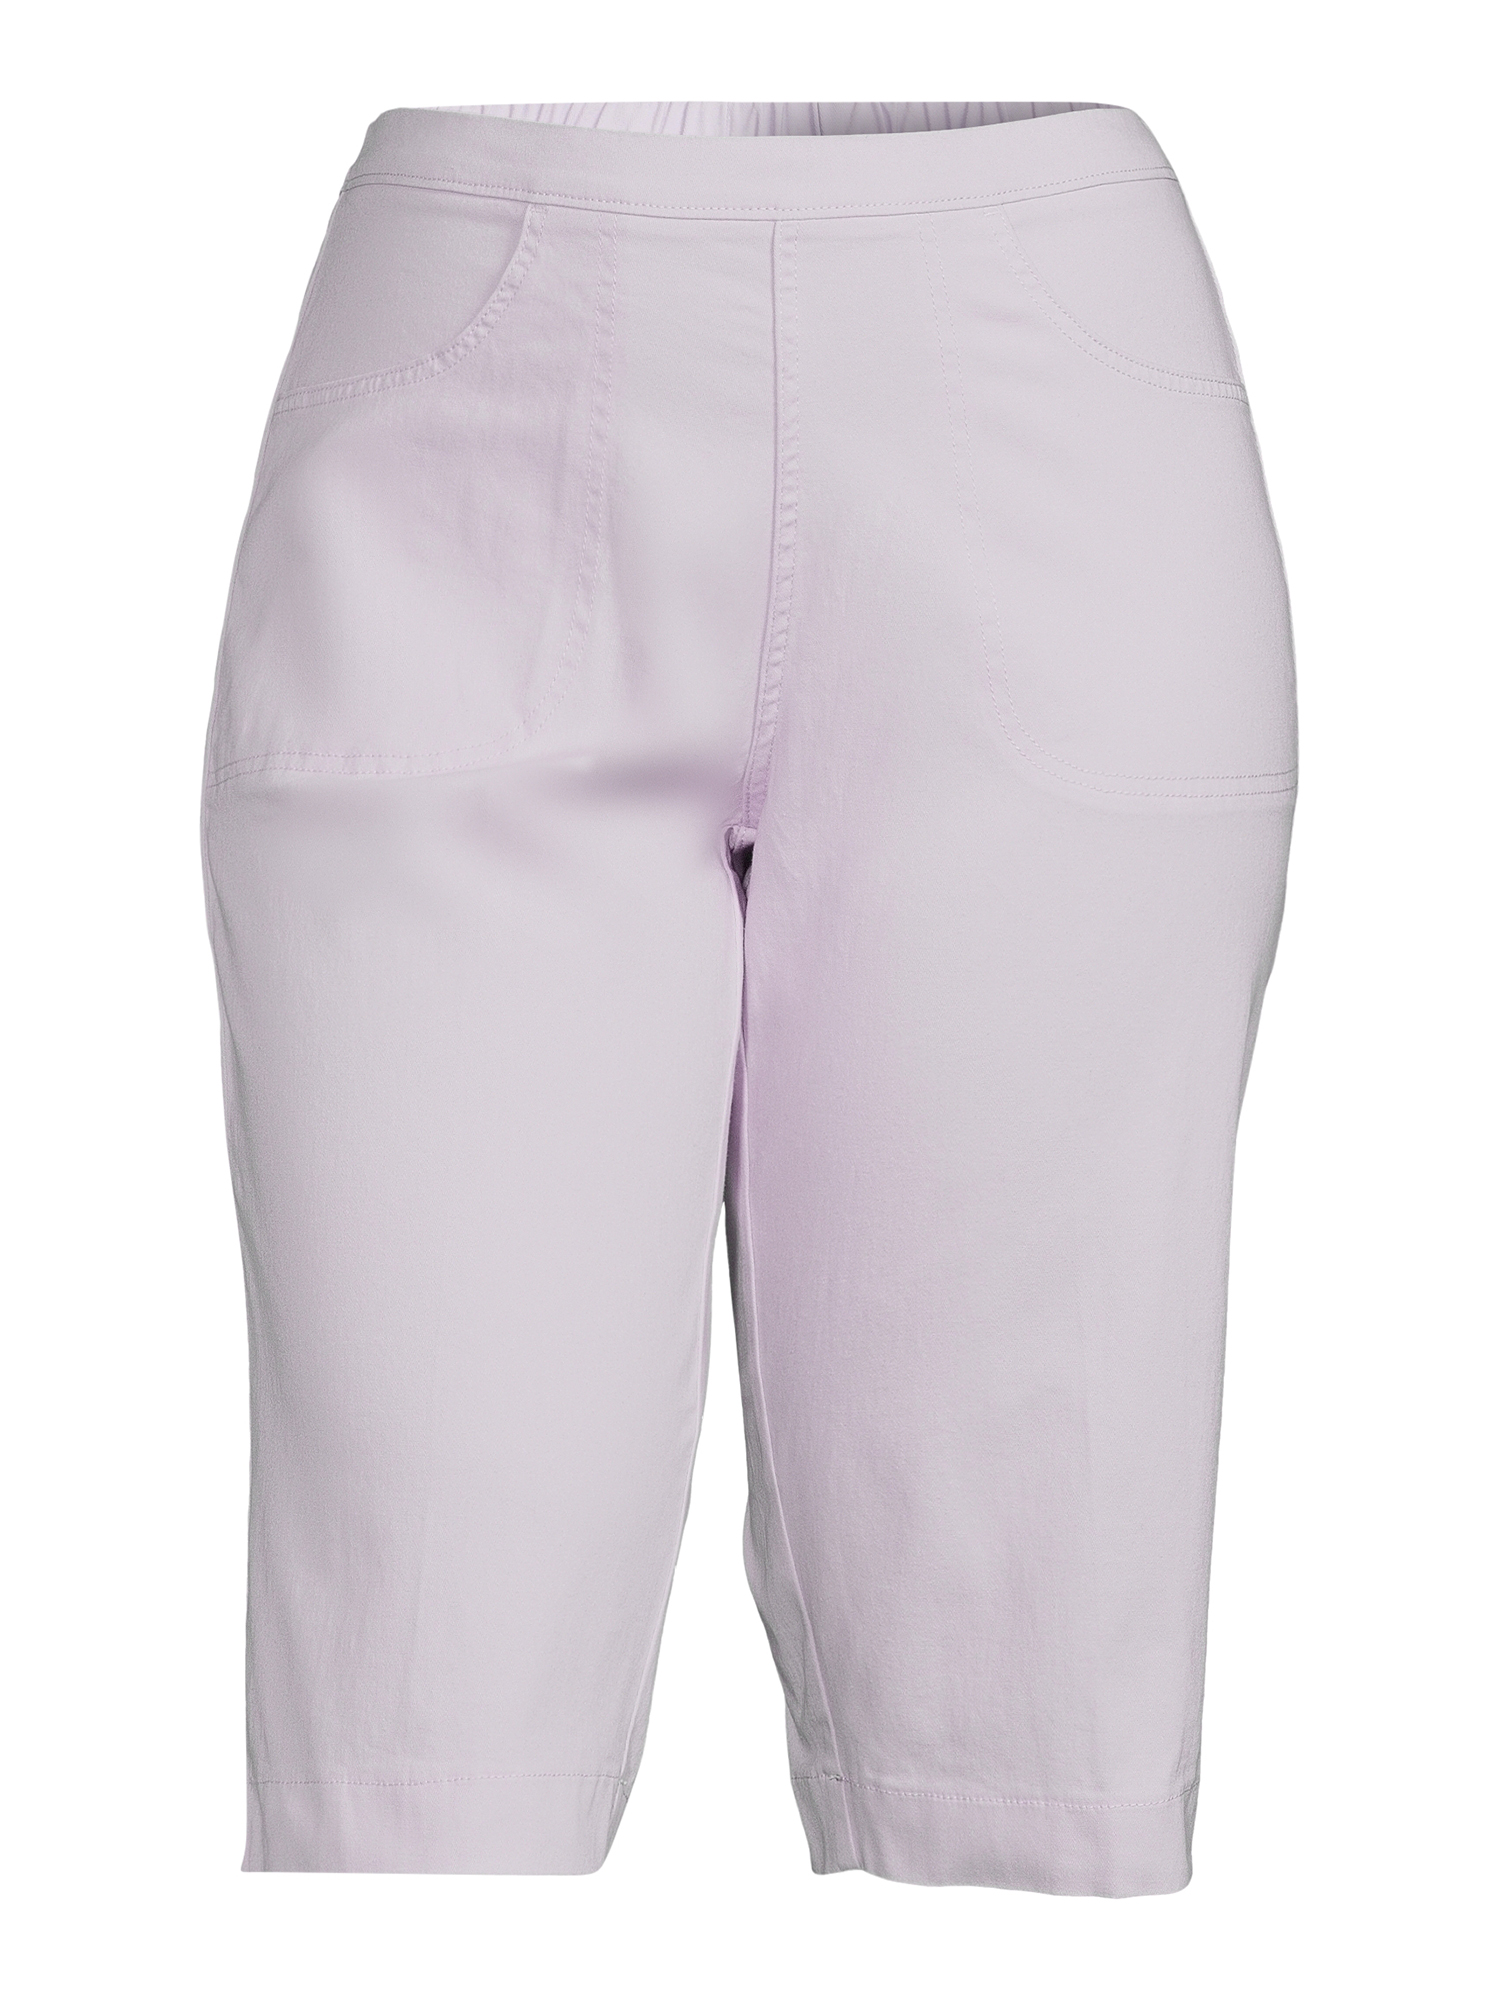 Just My Size Women's Plus Size Pull On 2 Pocket Stretch Capri - image 5 of 6